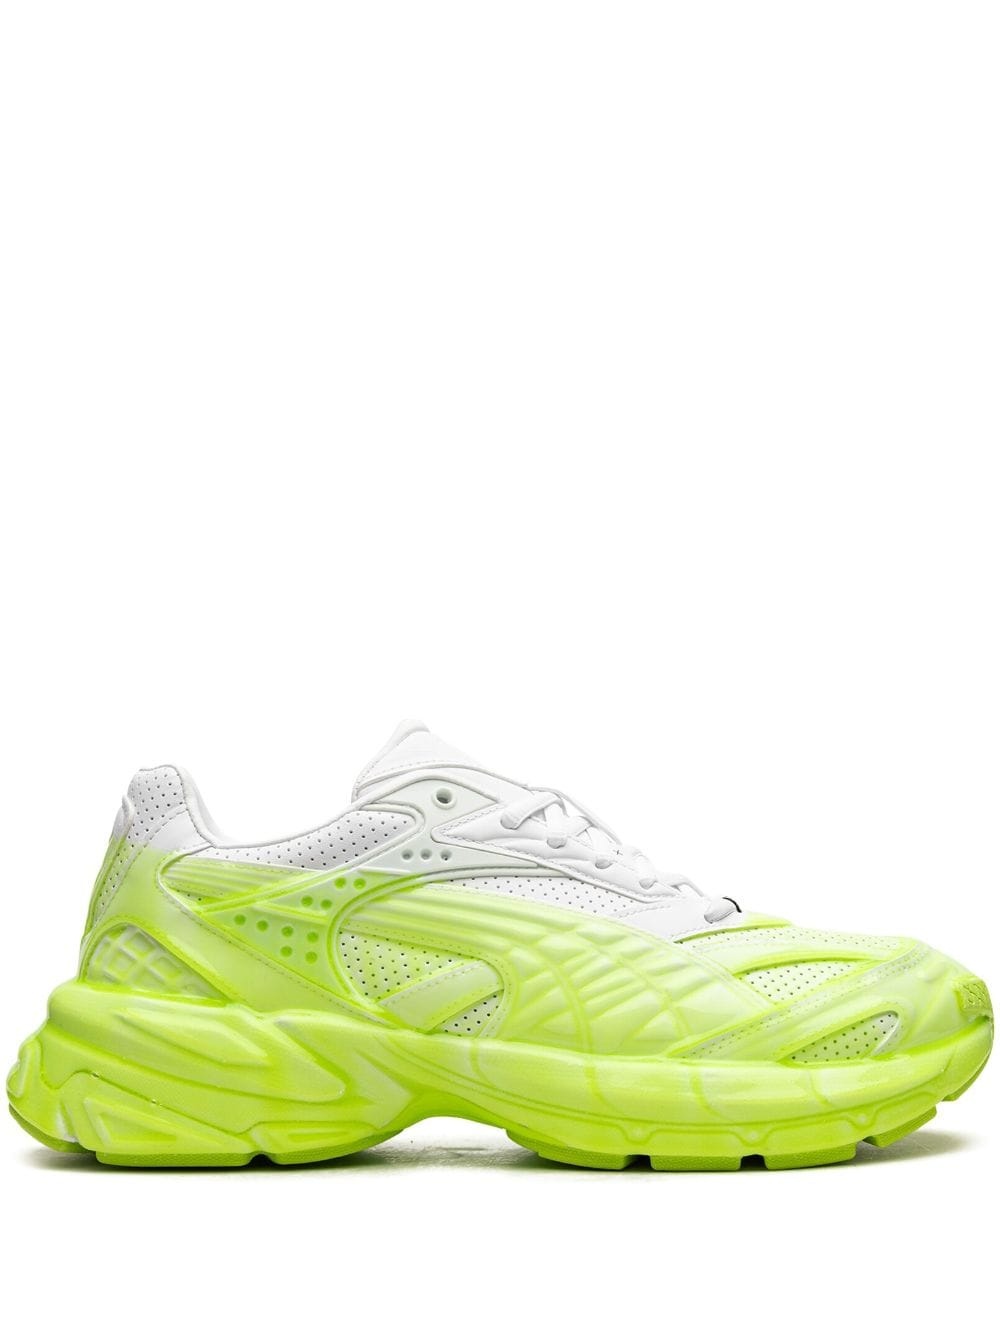 Velophasis Slime "Puma White/Pro Green" sneakers - 1